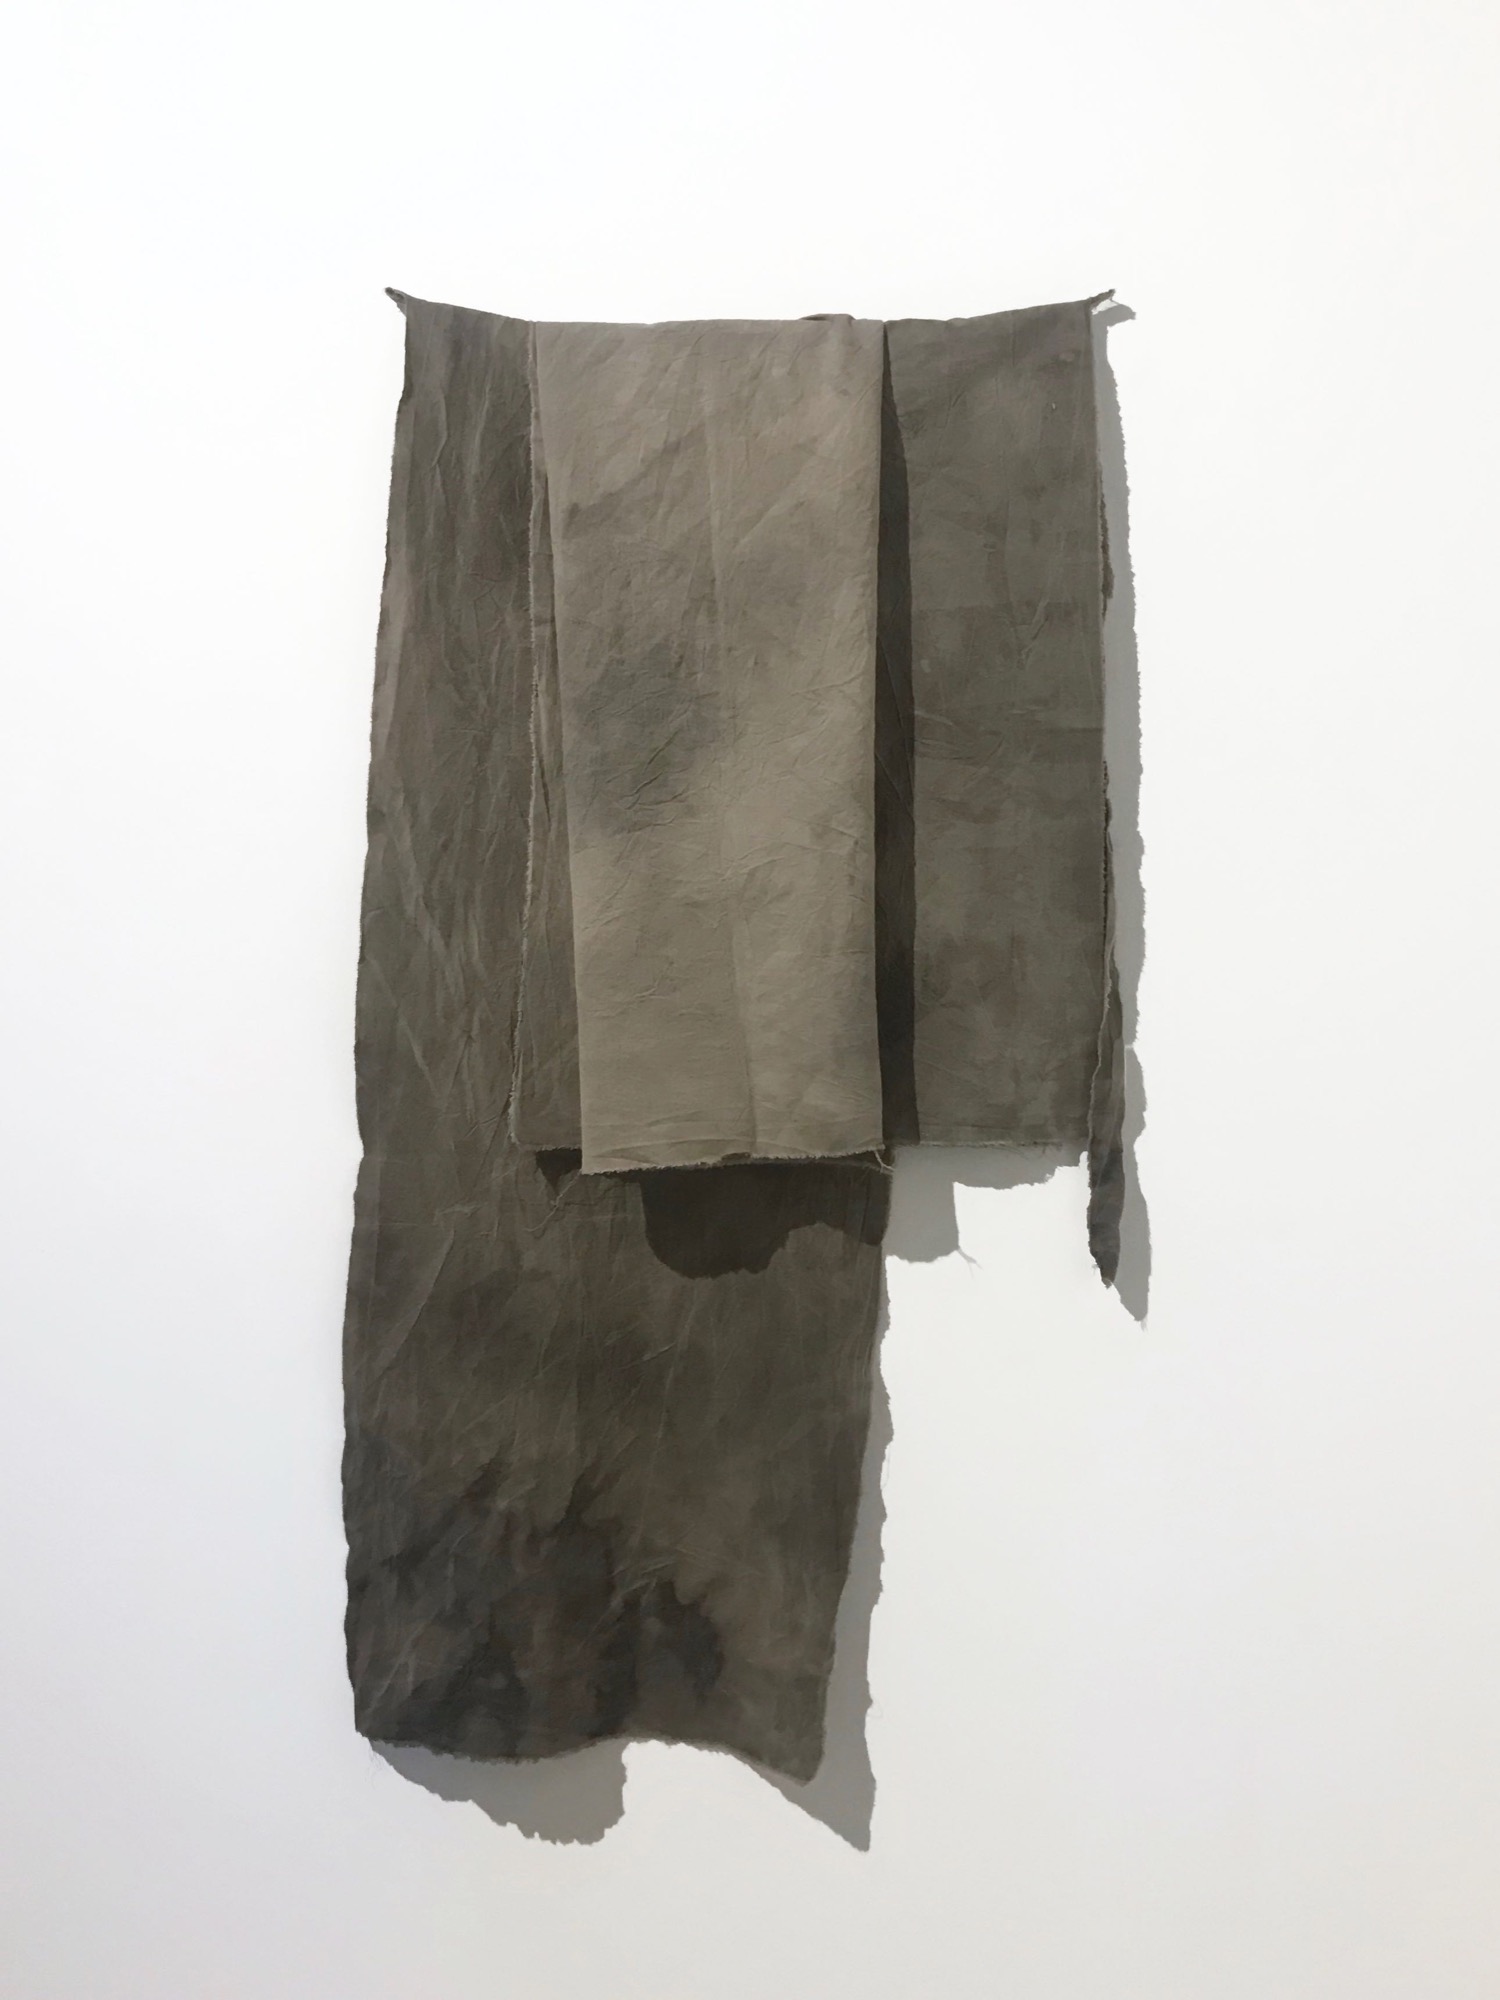 Katie West, <em>keeping pieces, yirarlla</em>, 2018, calico dyed with eucalyptus and puff ball, dimensions variable.